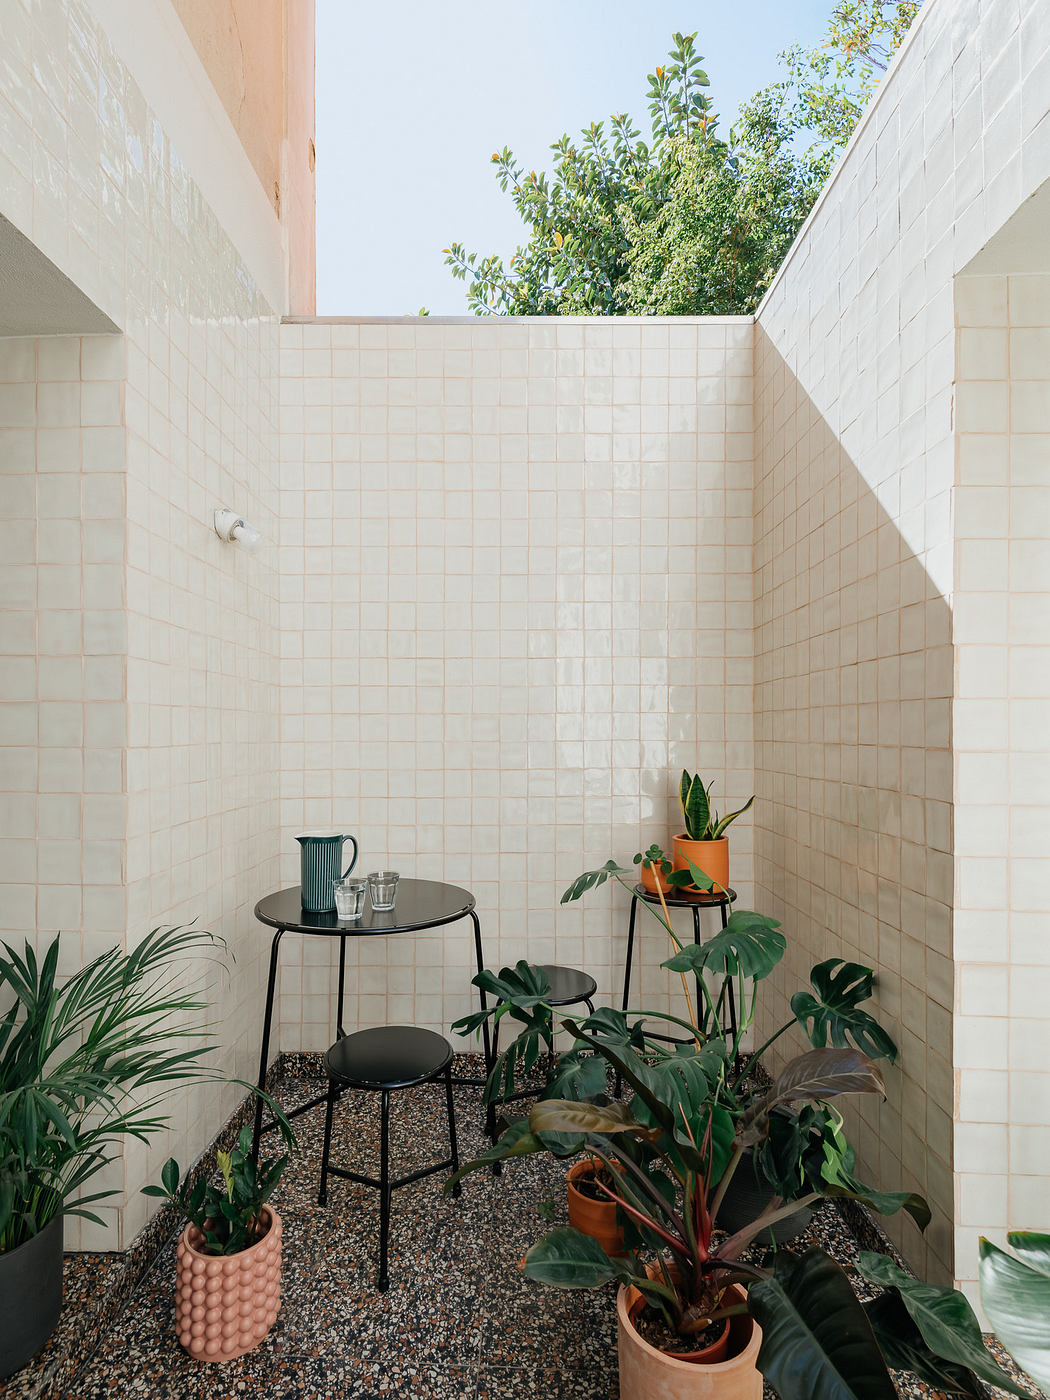 Minimalist courtyard with pale tiles and lush green plants